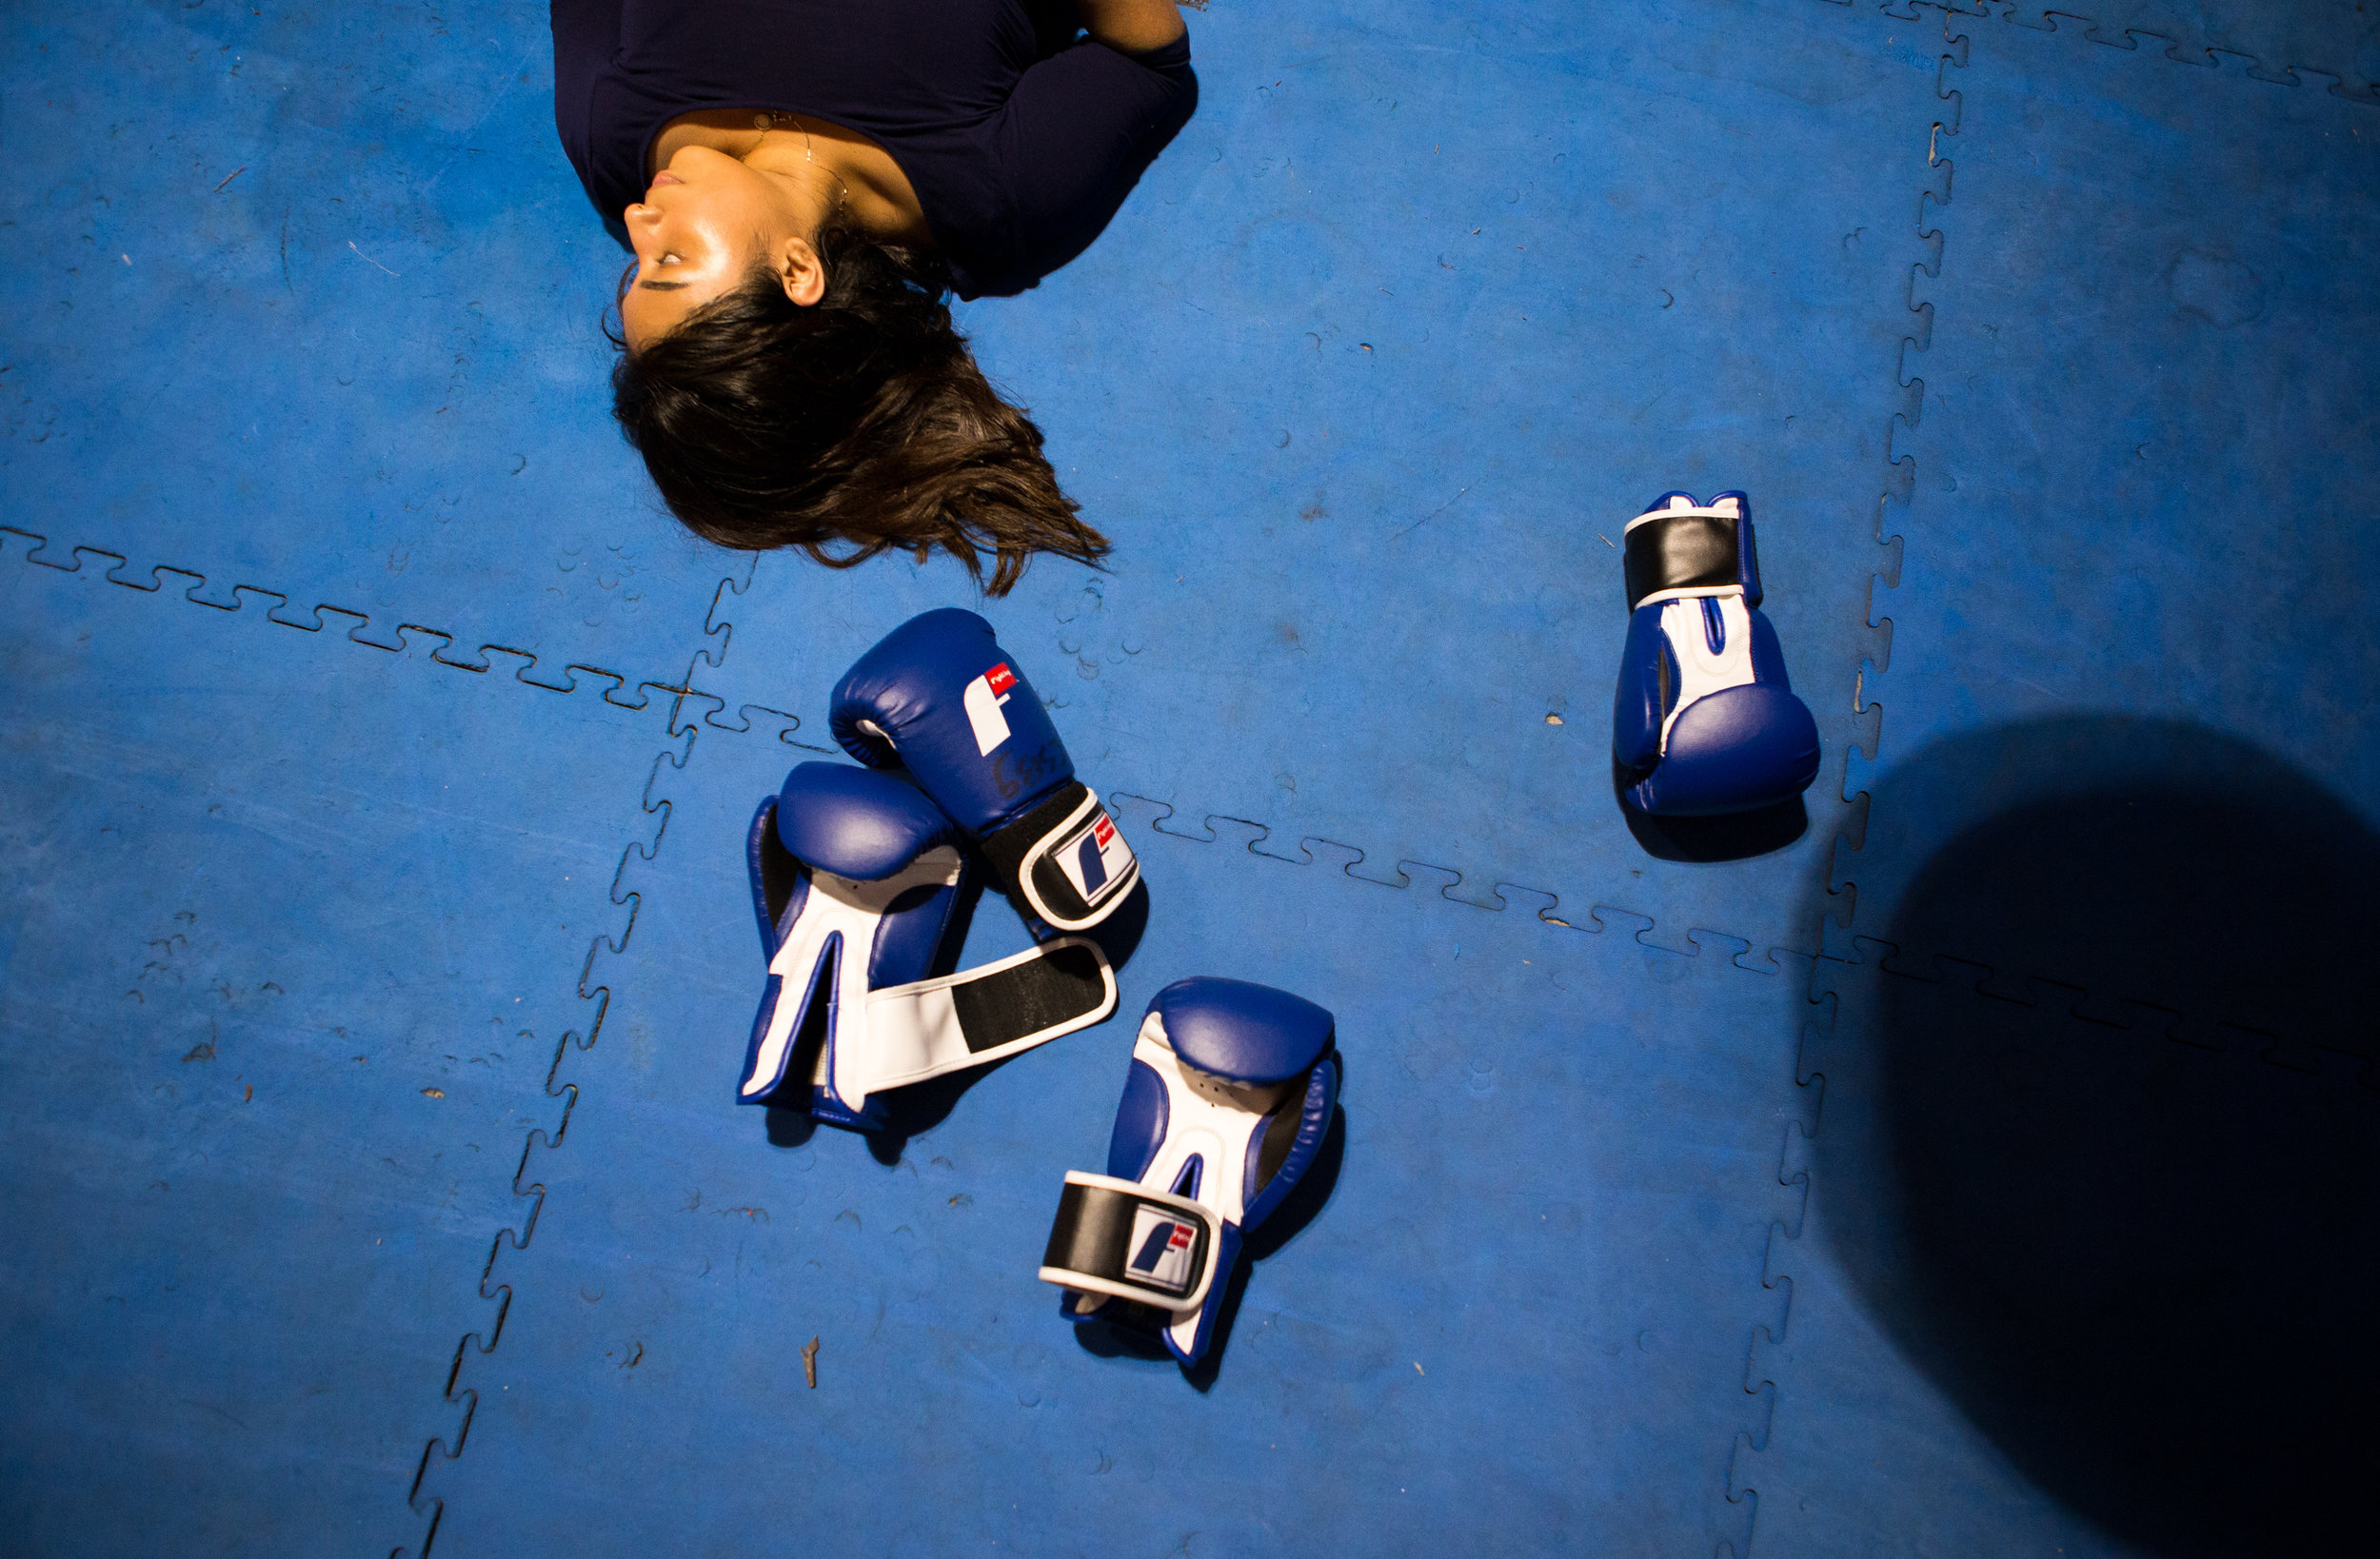 "Boxing makes me feel like I am in control of the world." – Ita, 17